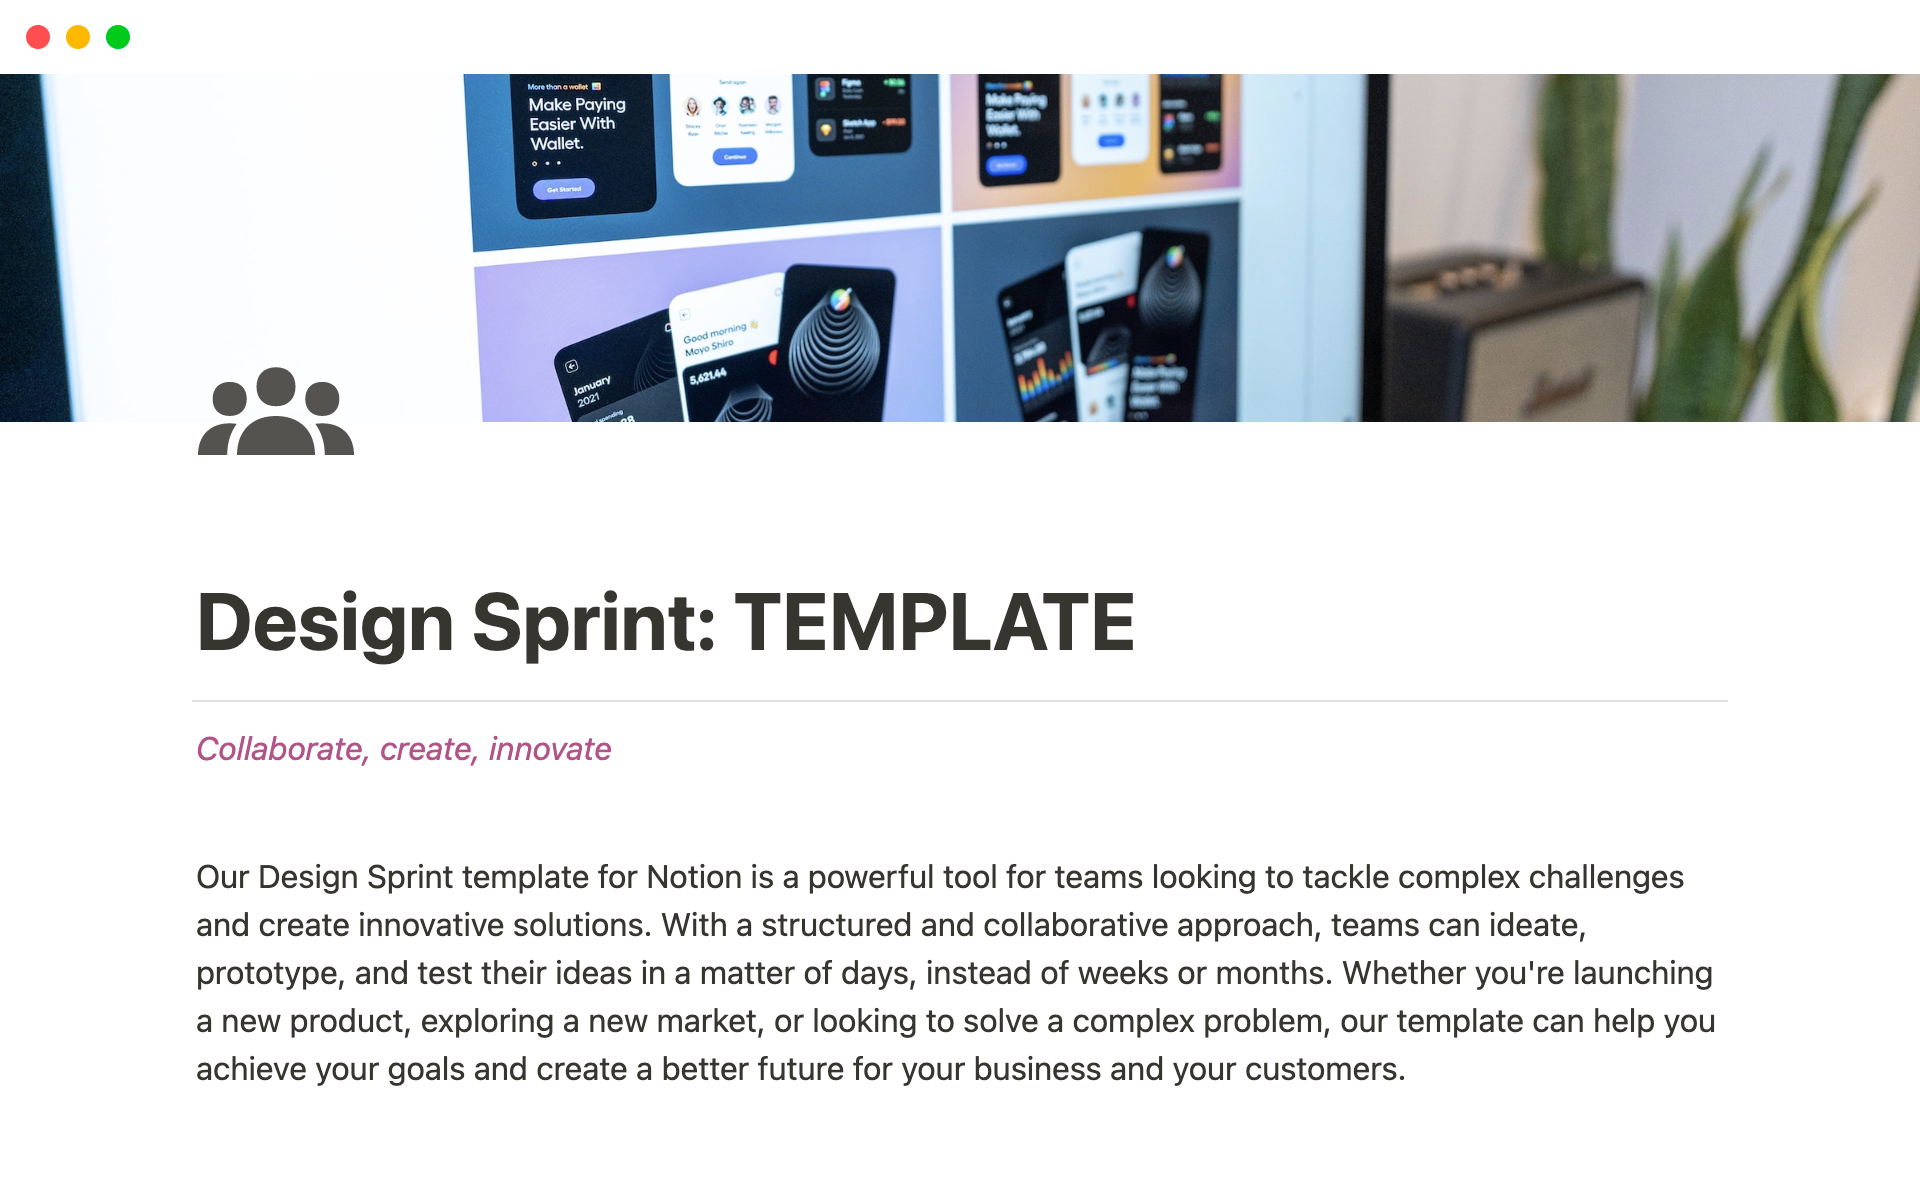 The Design Sprint template provides a structured process for teams to quickly ideate, prototype, and test solutions to complex problems.